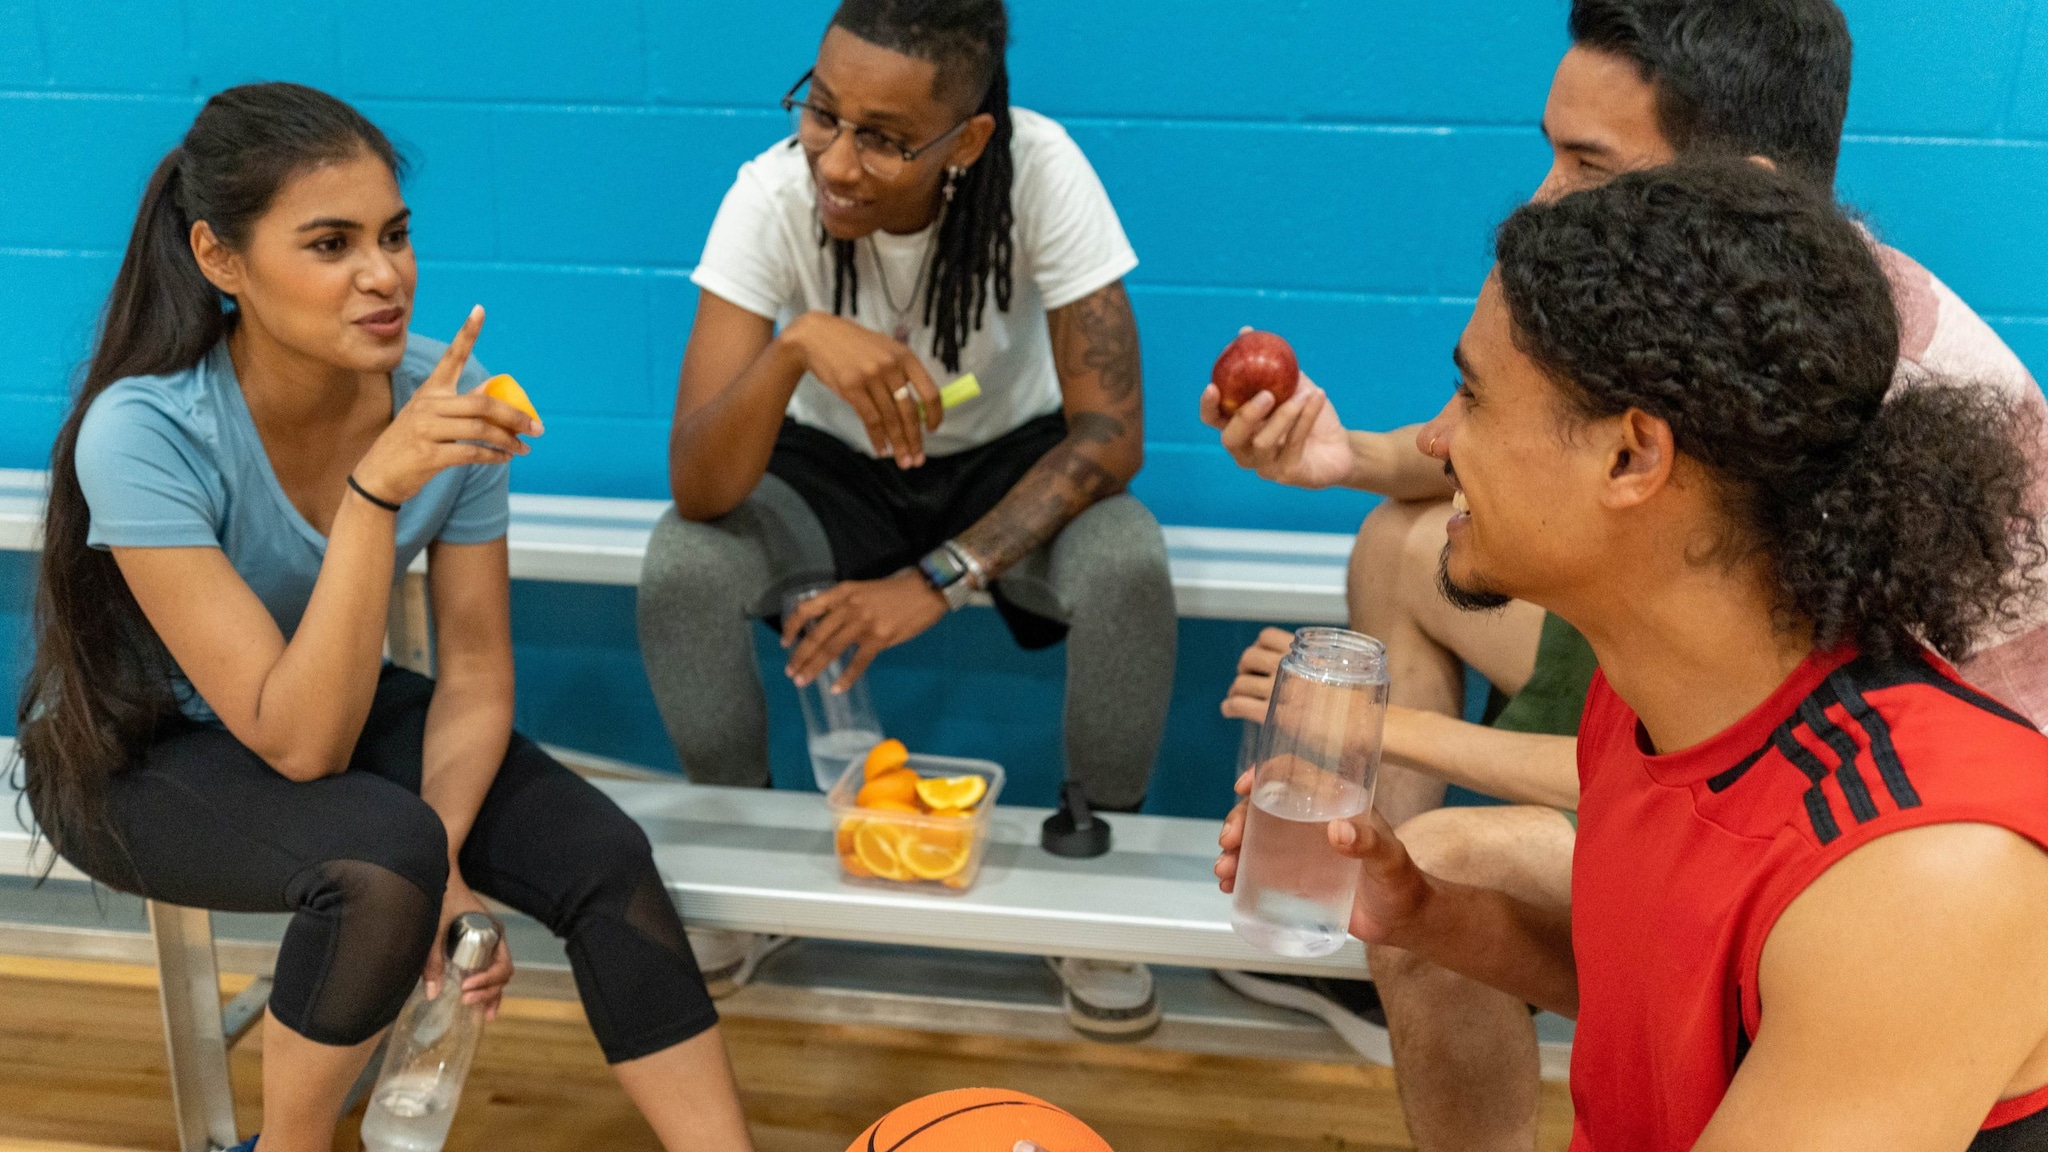 Four young people eating healthy snacks while taking a break from playing basketball.